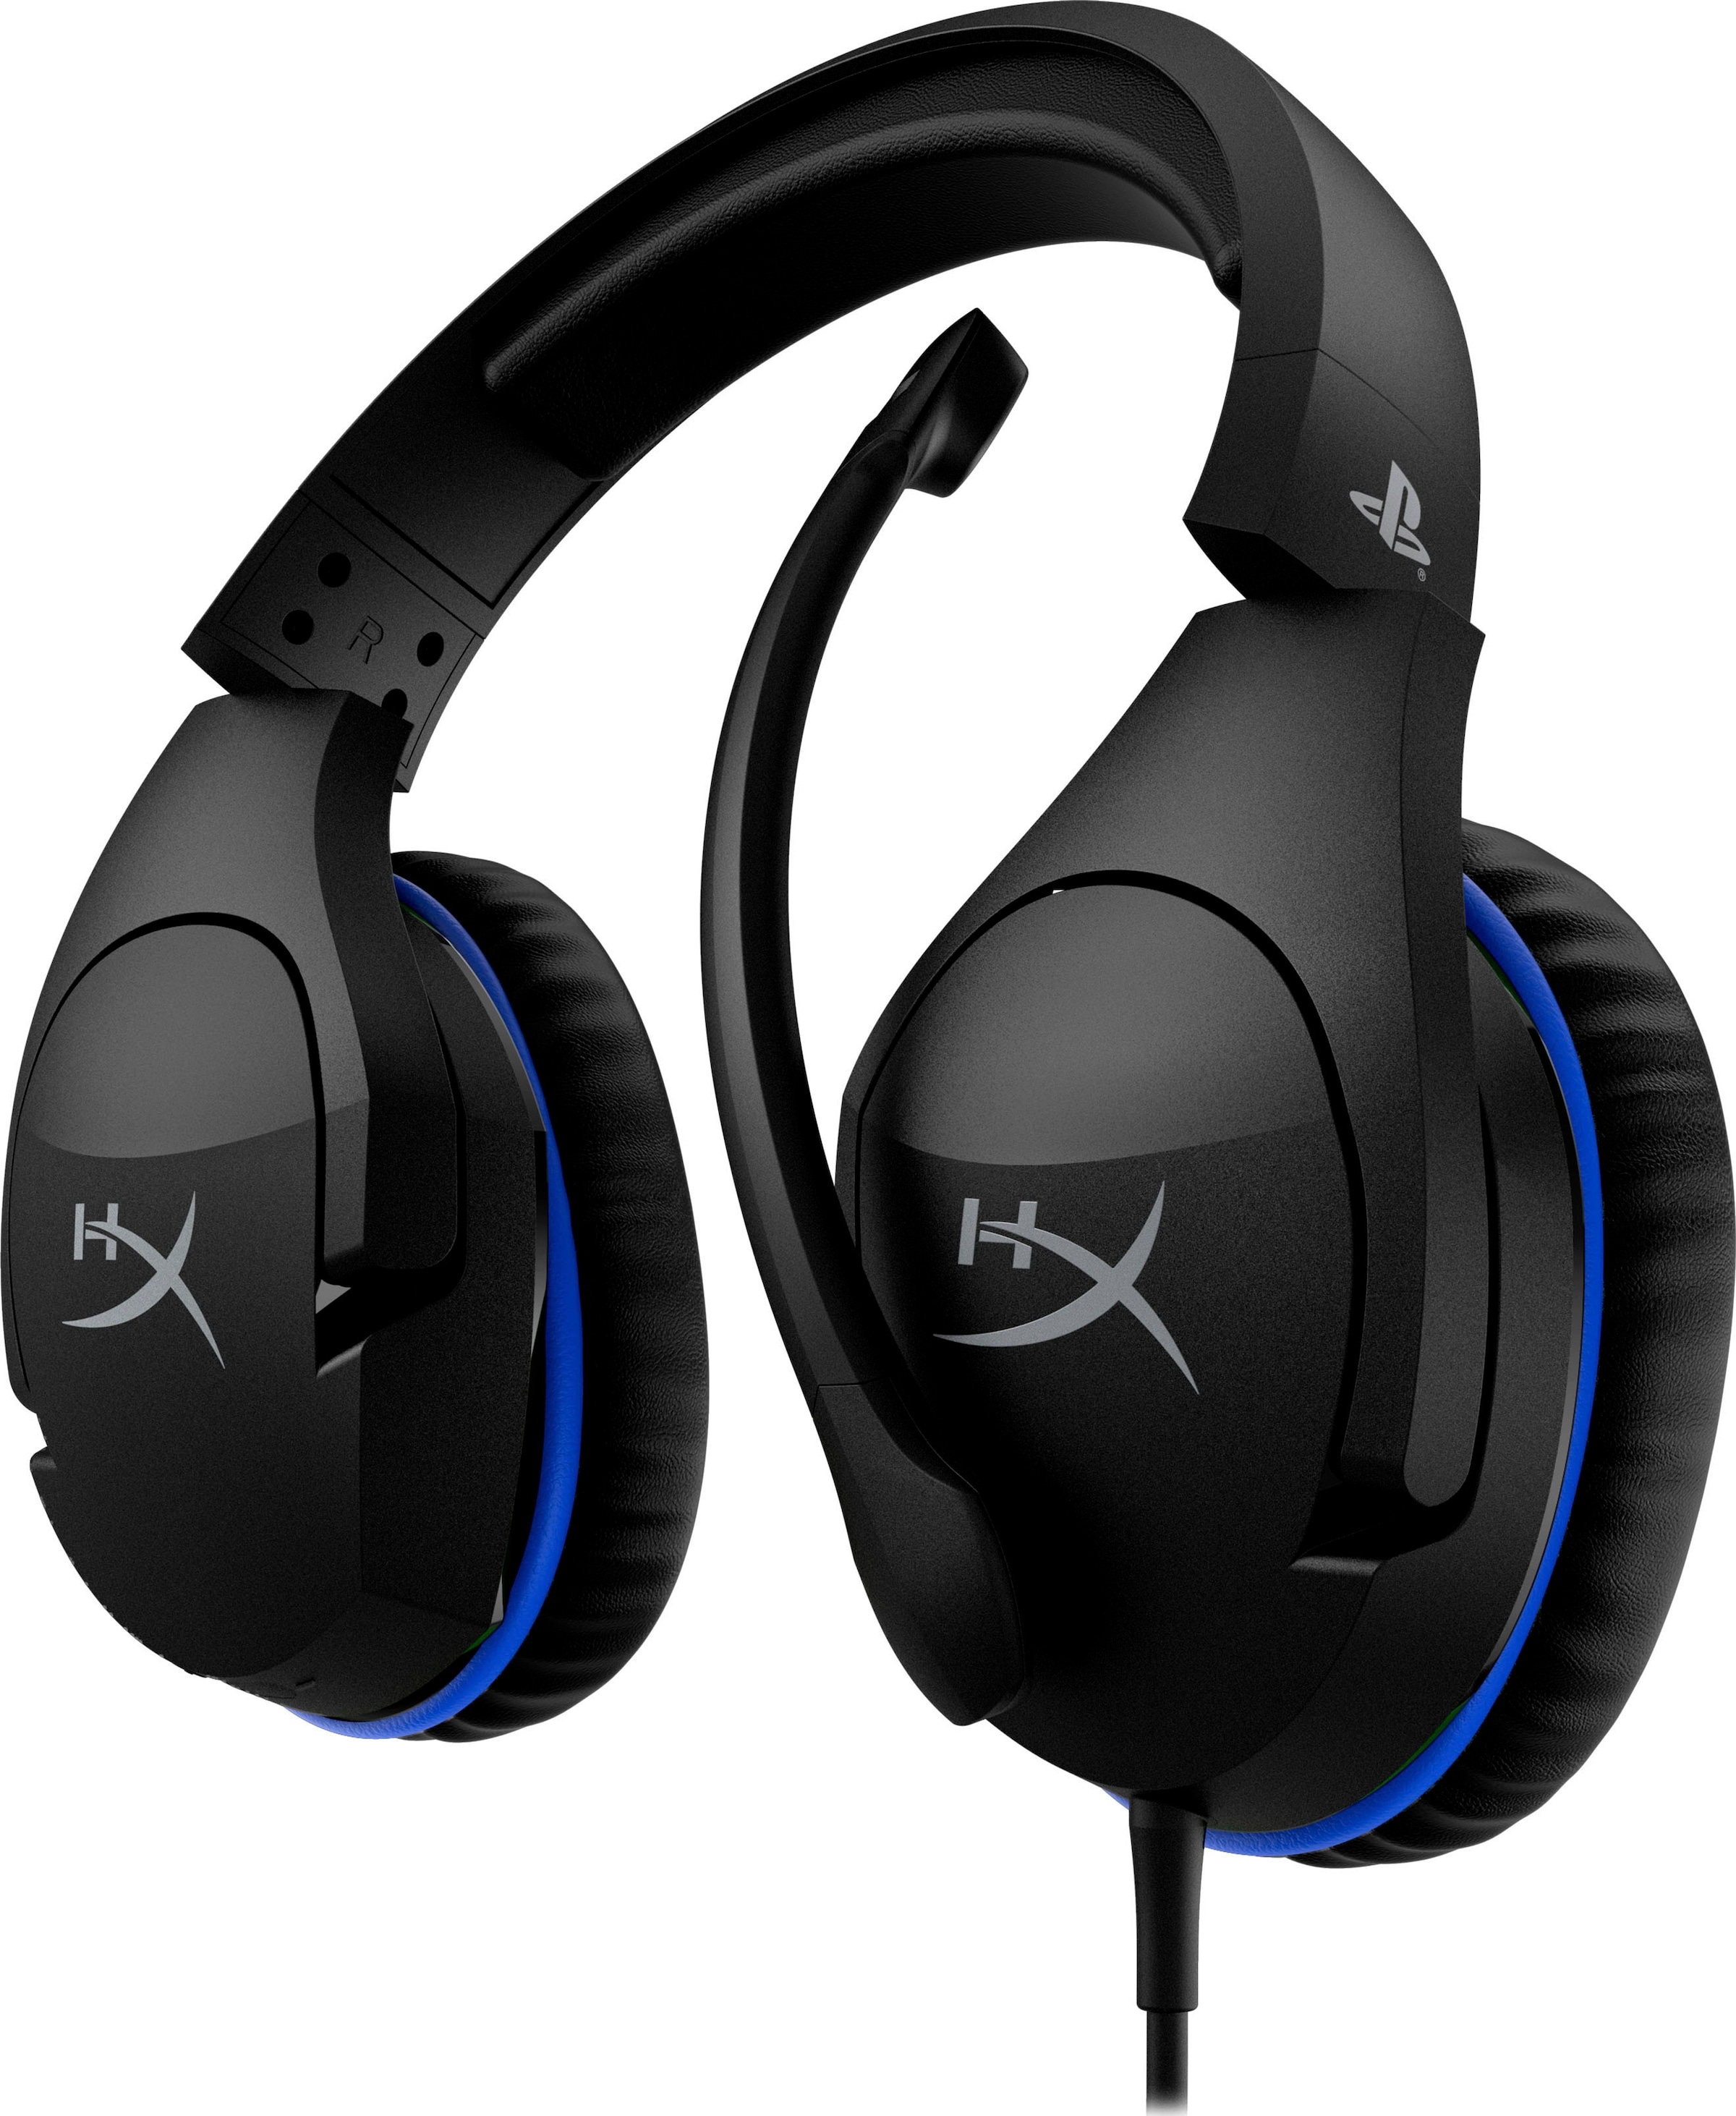 HyperX Gaming-Headset »Cloud Stinger (PS4 Licensed)«, Mikrofon abnehmbar  jetzt bei OTTO